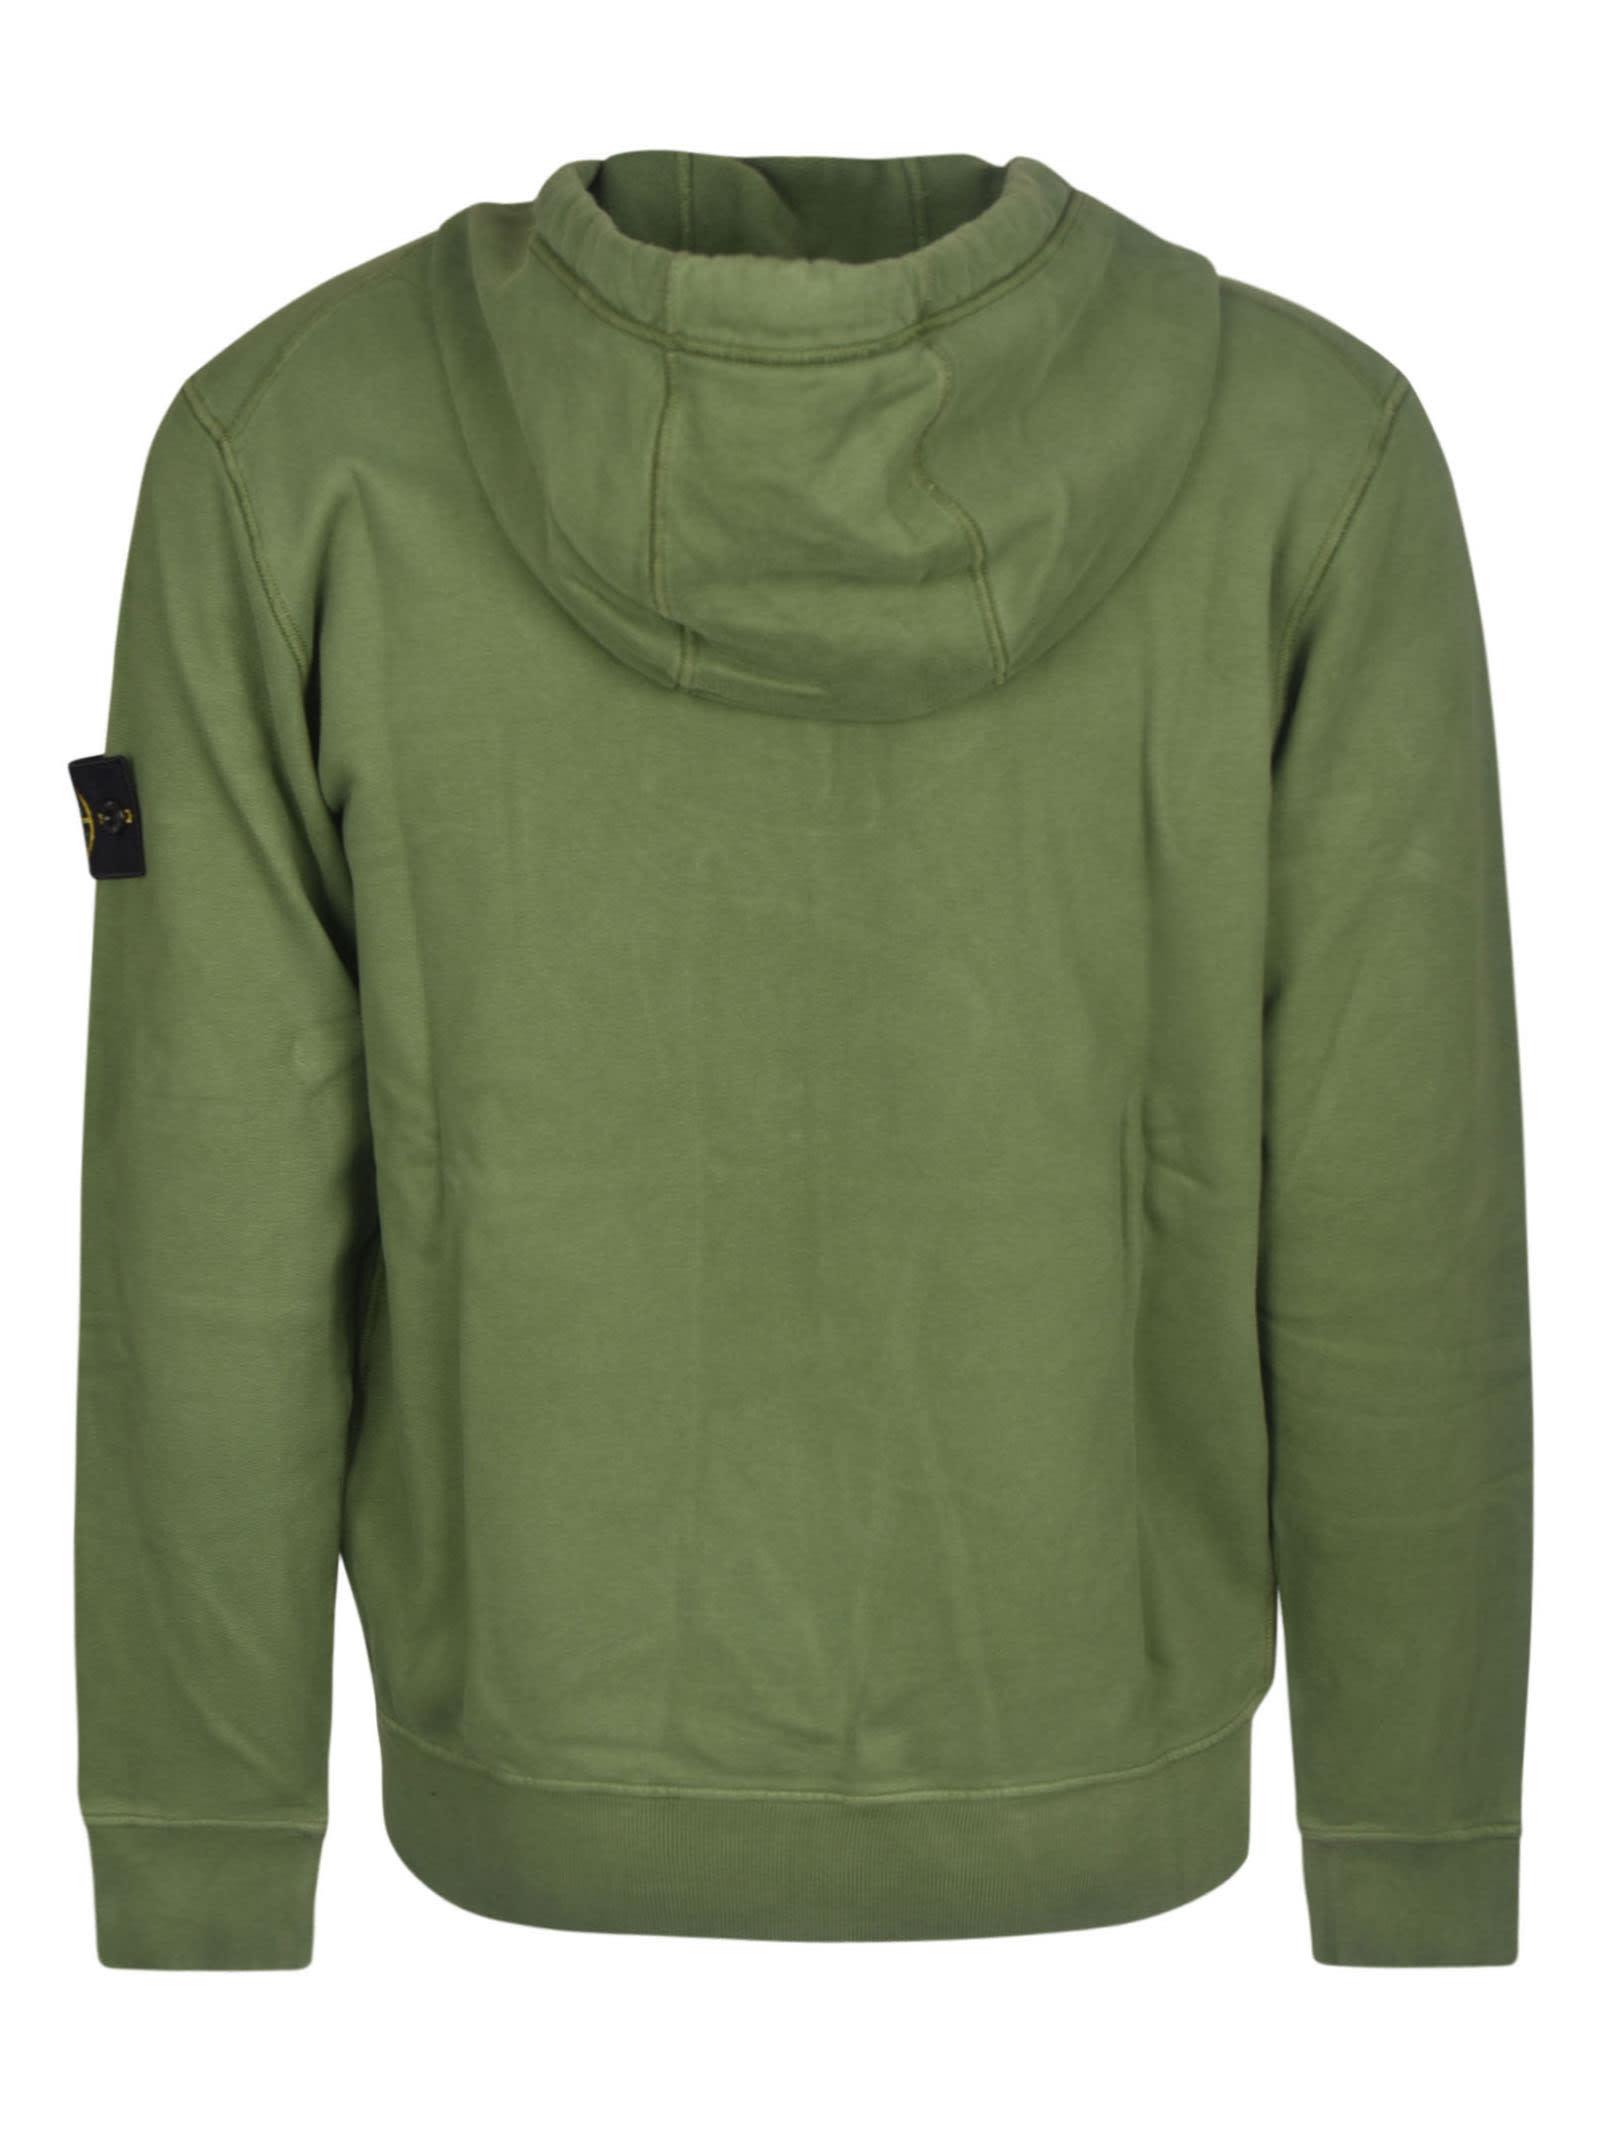 Stone Island Cotton Zipped Hoodie in Olive (Green) for Men - Save 9% | Lyst